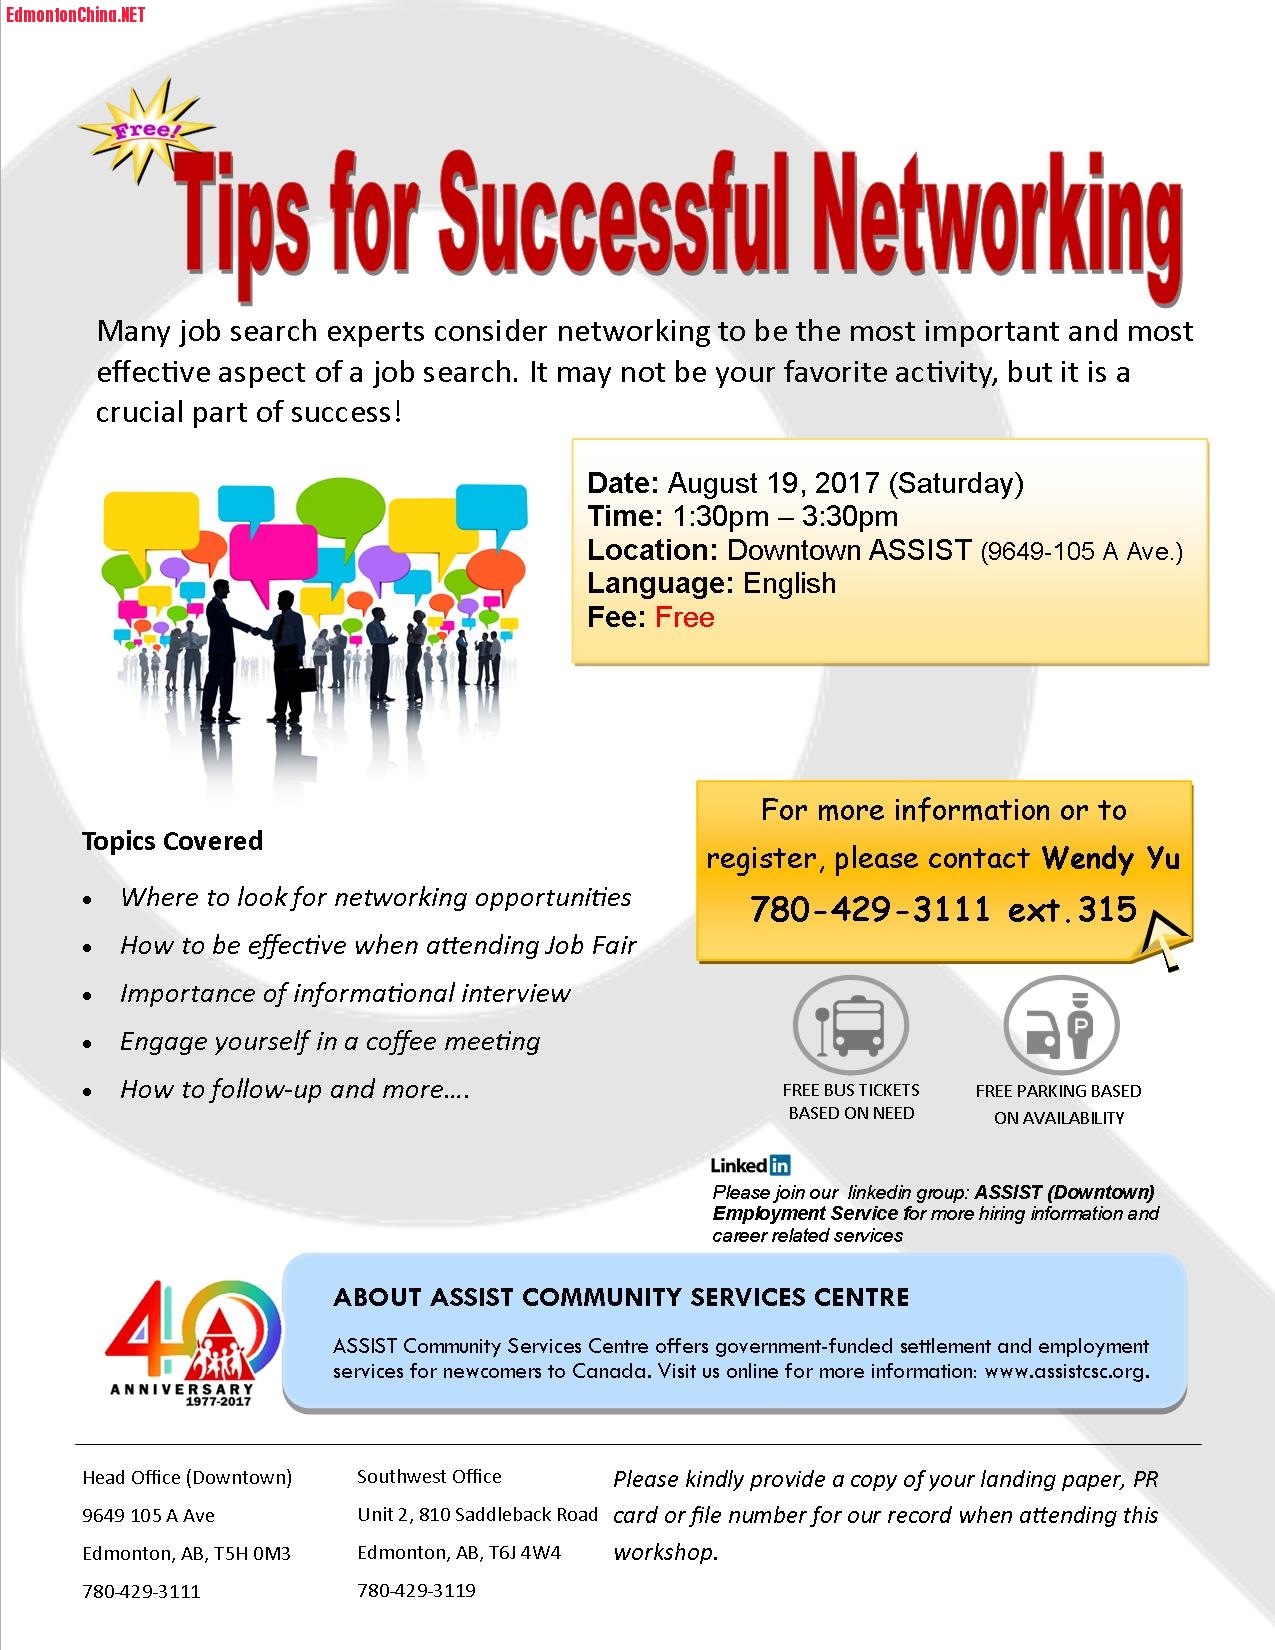 Tips for networking_Aug2017.jpg